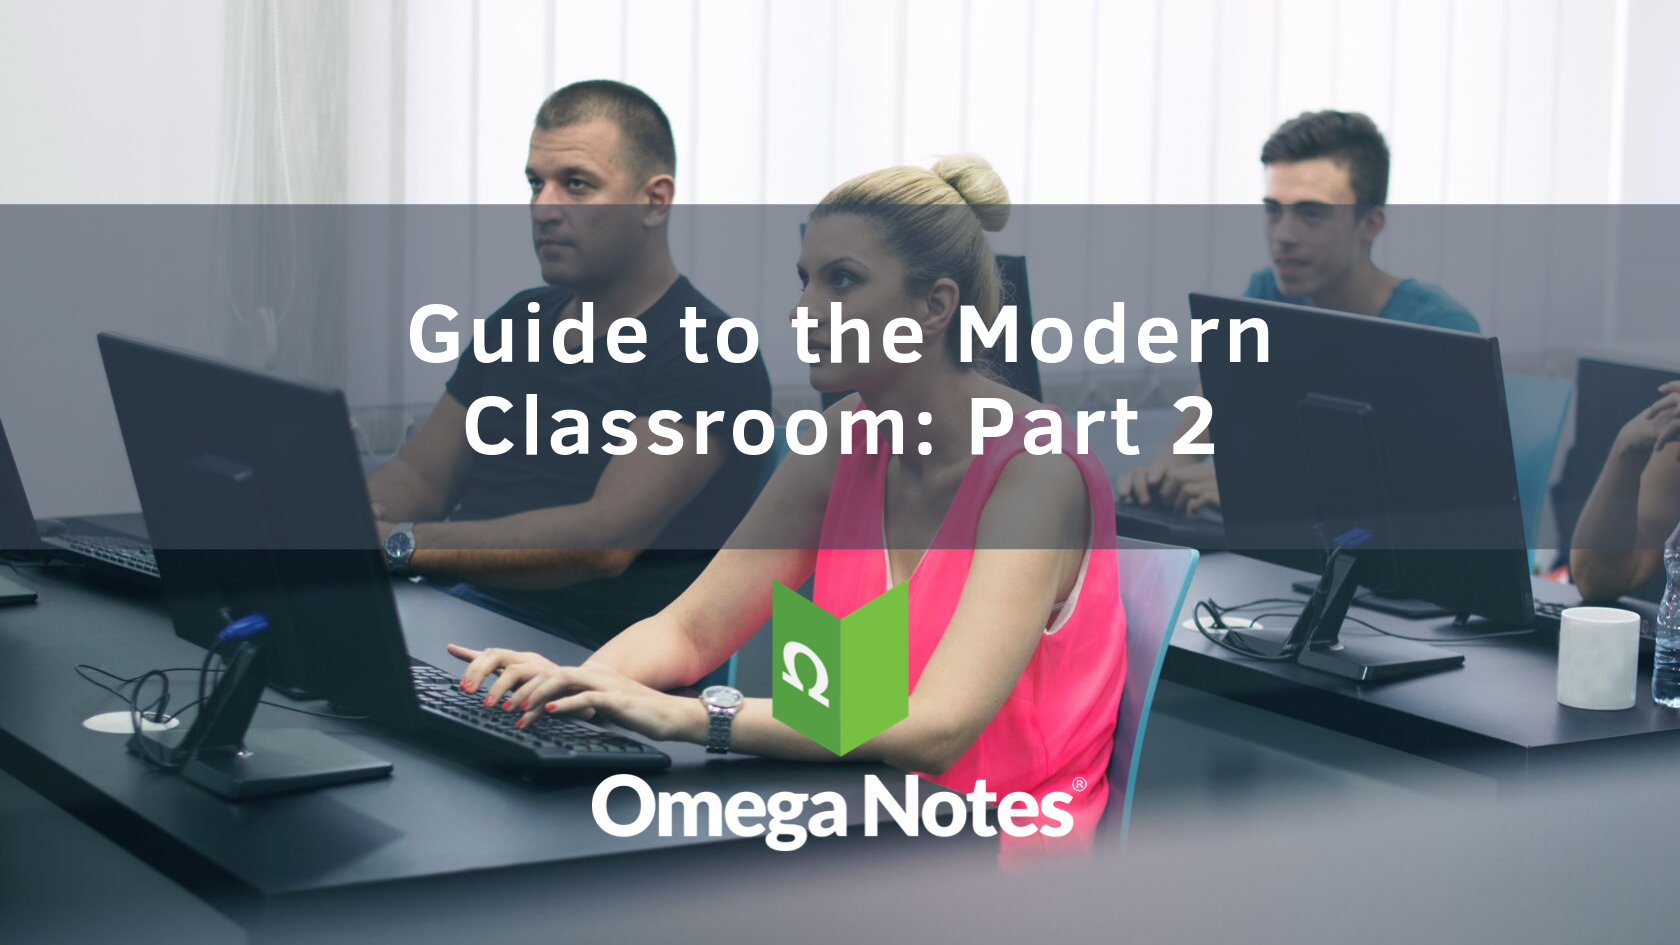 Guide to the Modern Classroom Part 2